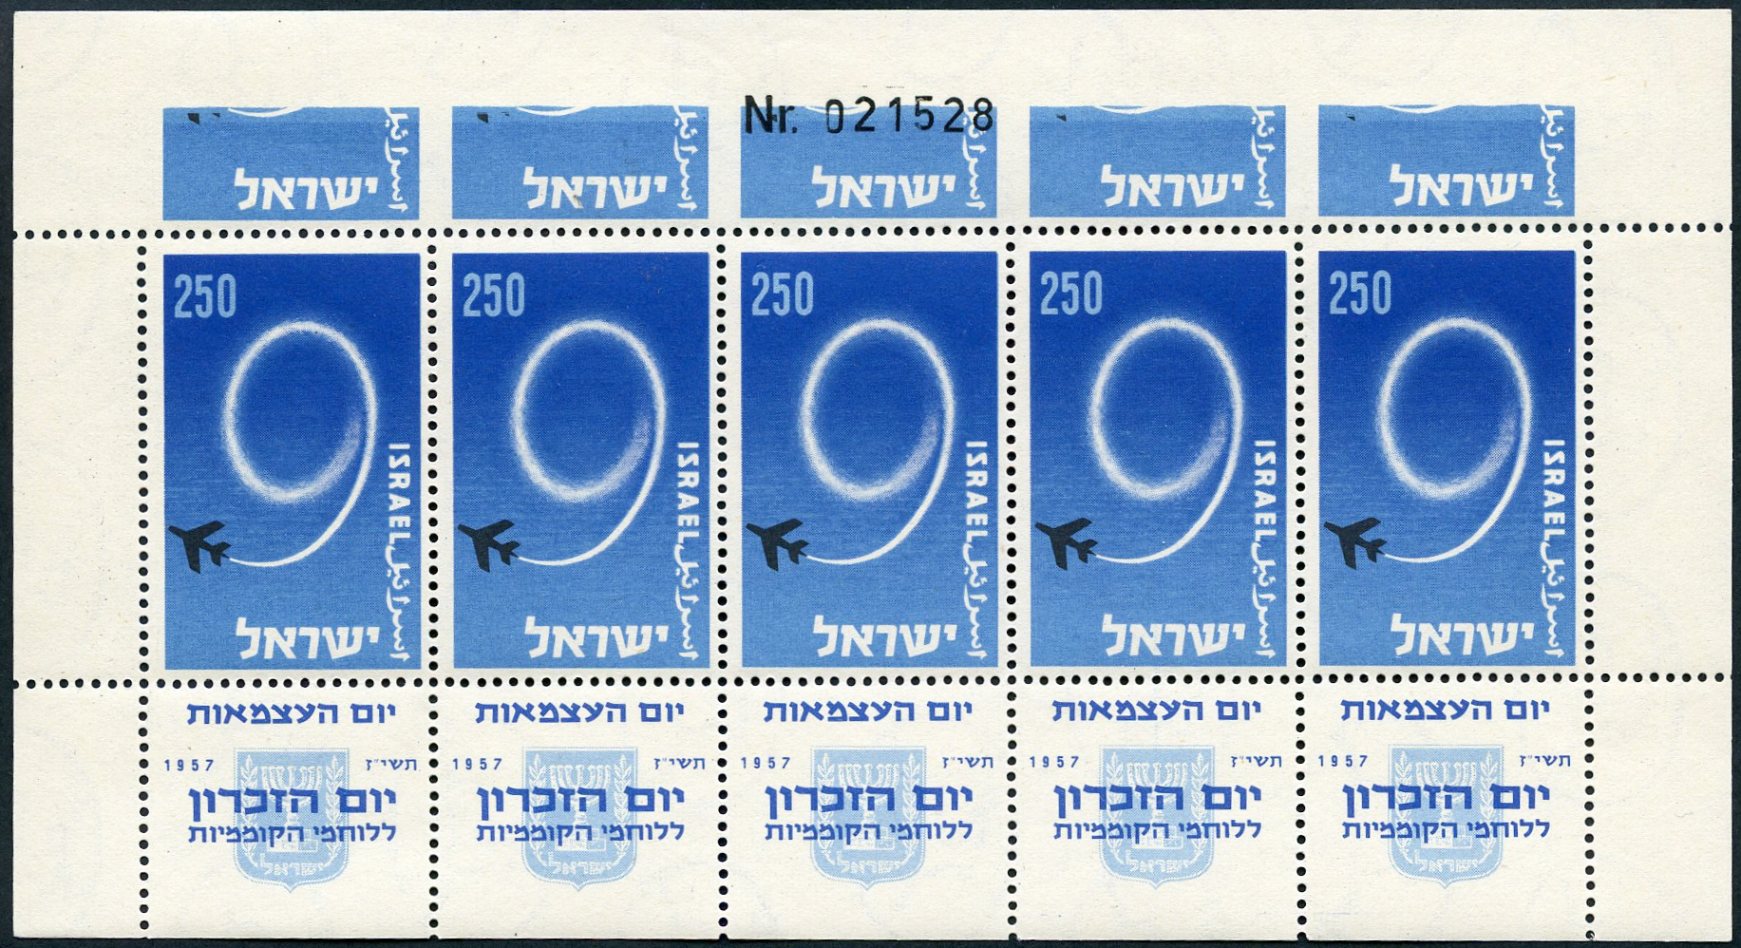 Lot 315 - ISRAEL: ISSUES, FDC's, PLATE BLOCKS & BOOKLETS  -  Tel Aviv Stamps Ltd. Auction #50